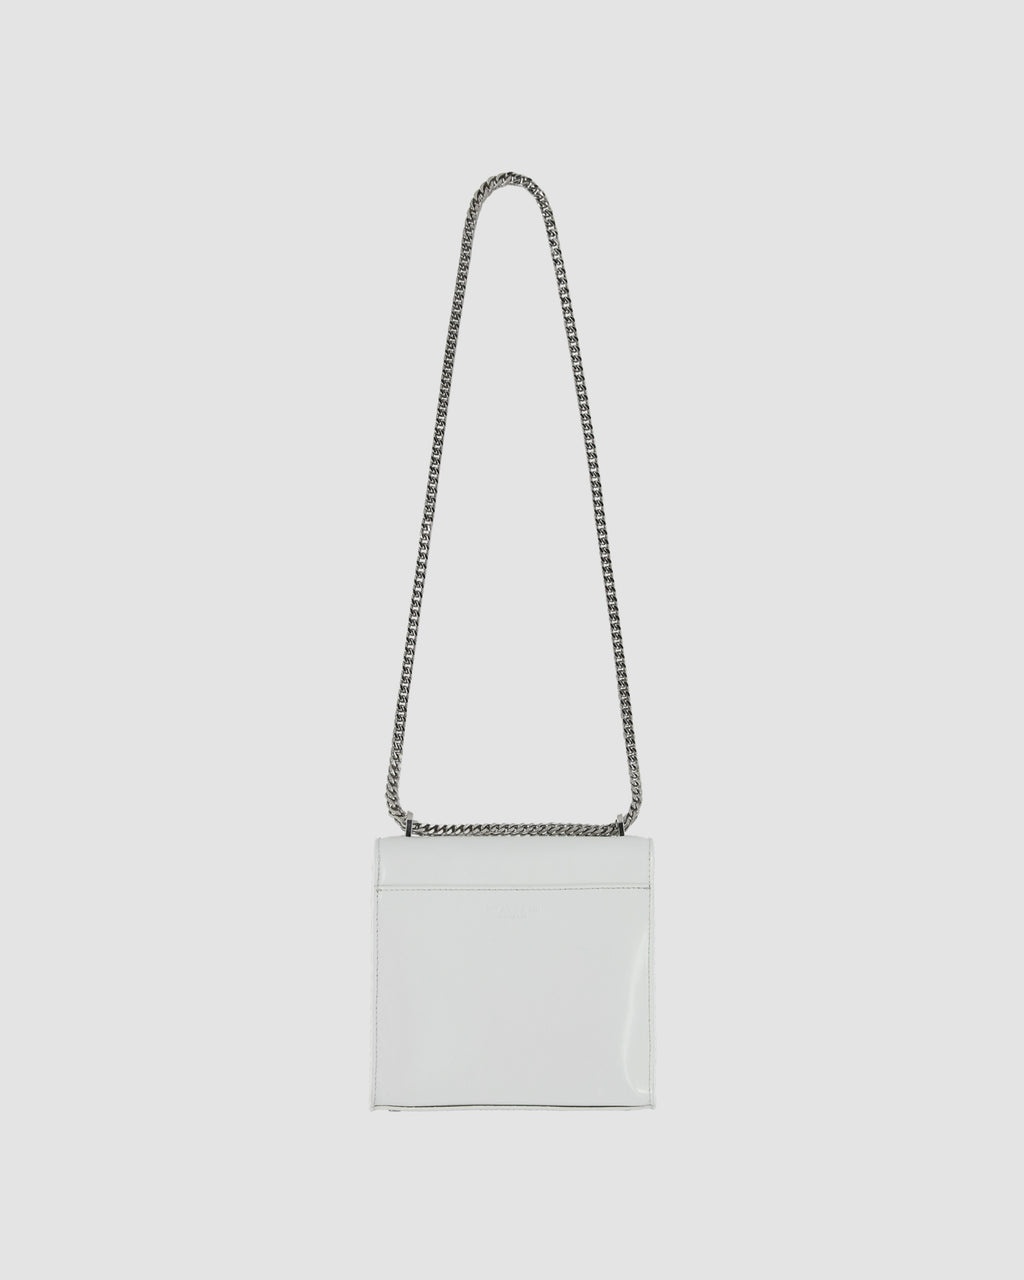 1017 ALYX 9SM LUDO BAG WITH CHAIN STRAP | REVERSIBLE